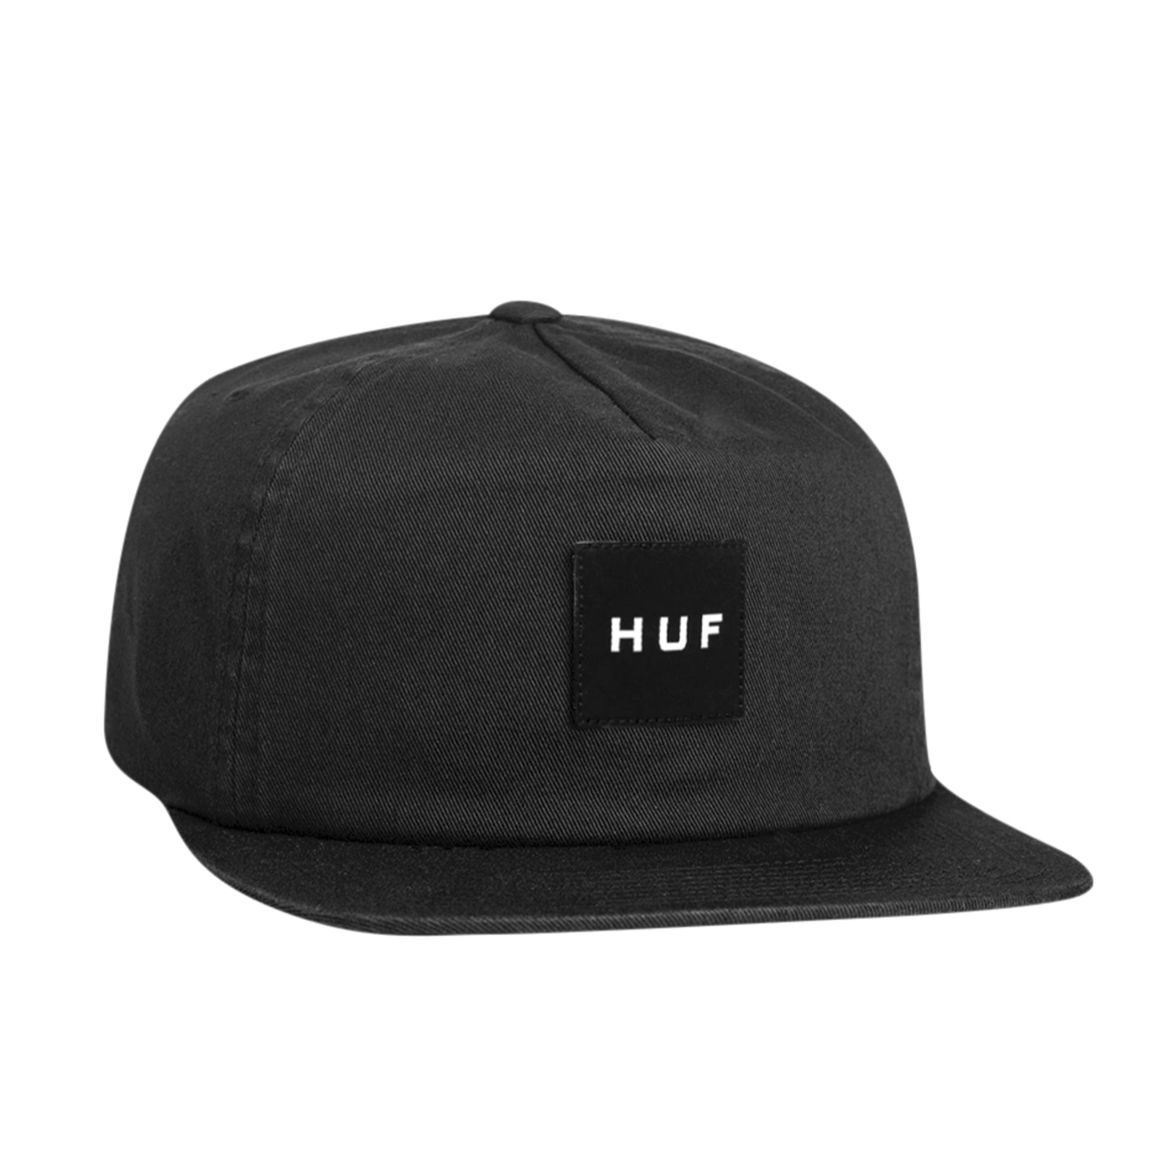 HUF Unstructured Box Snapback